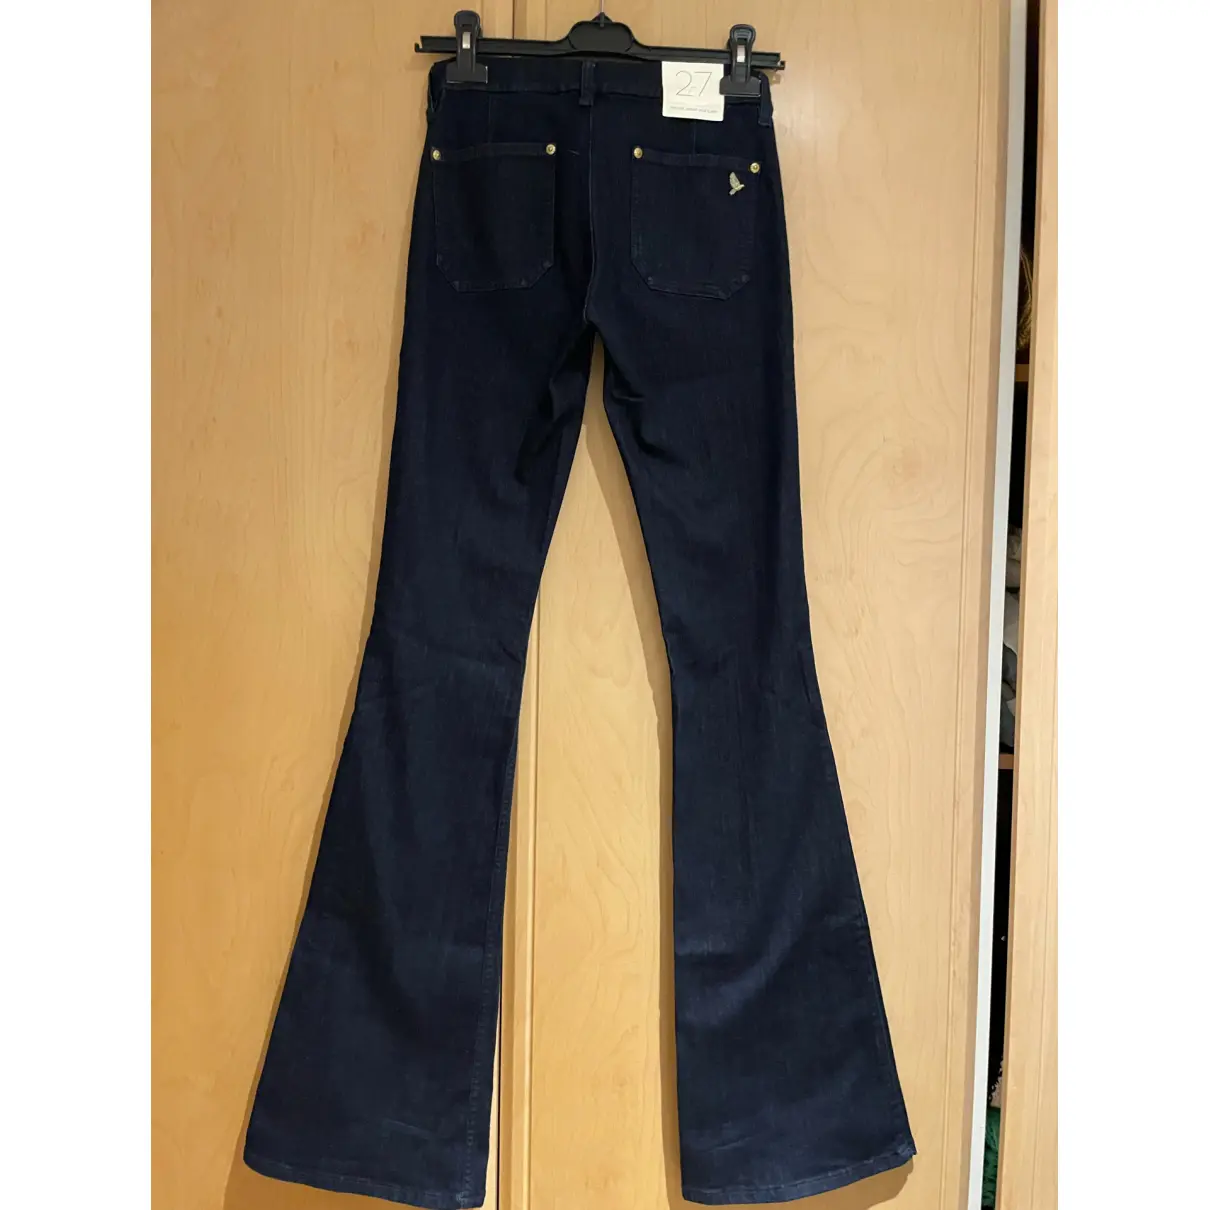 Buy Mih Jeans Bootcut jeans online